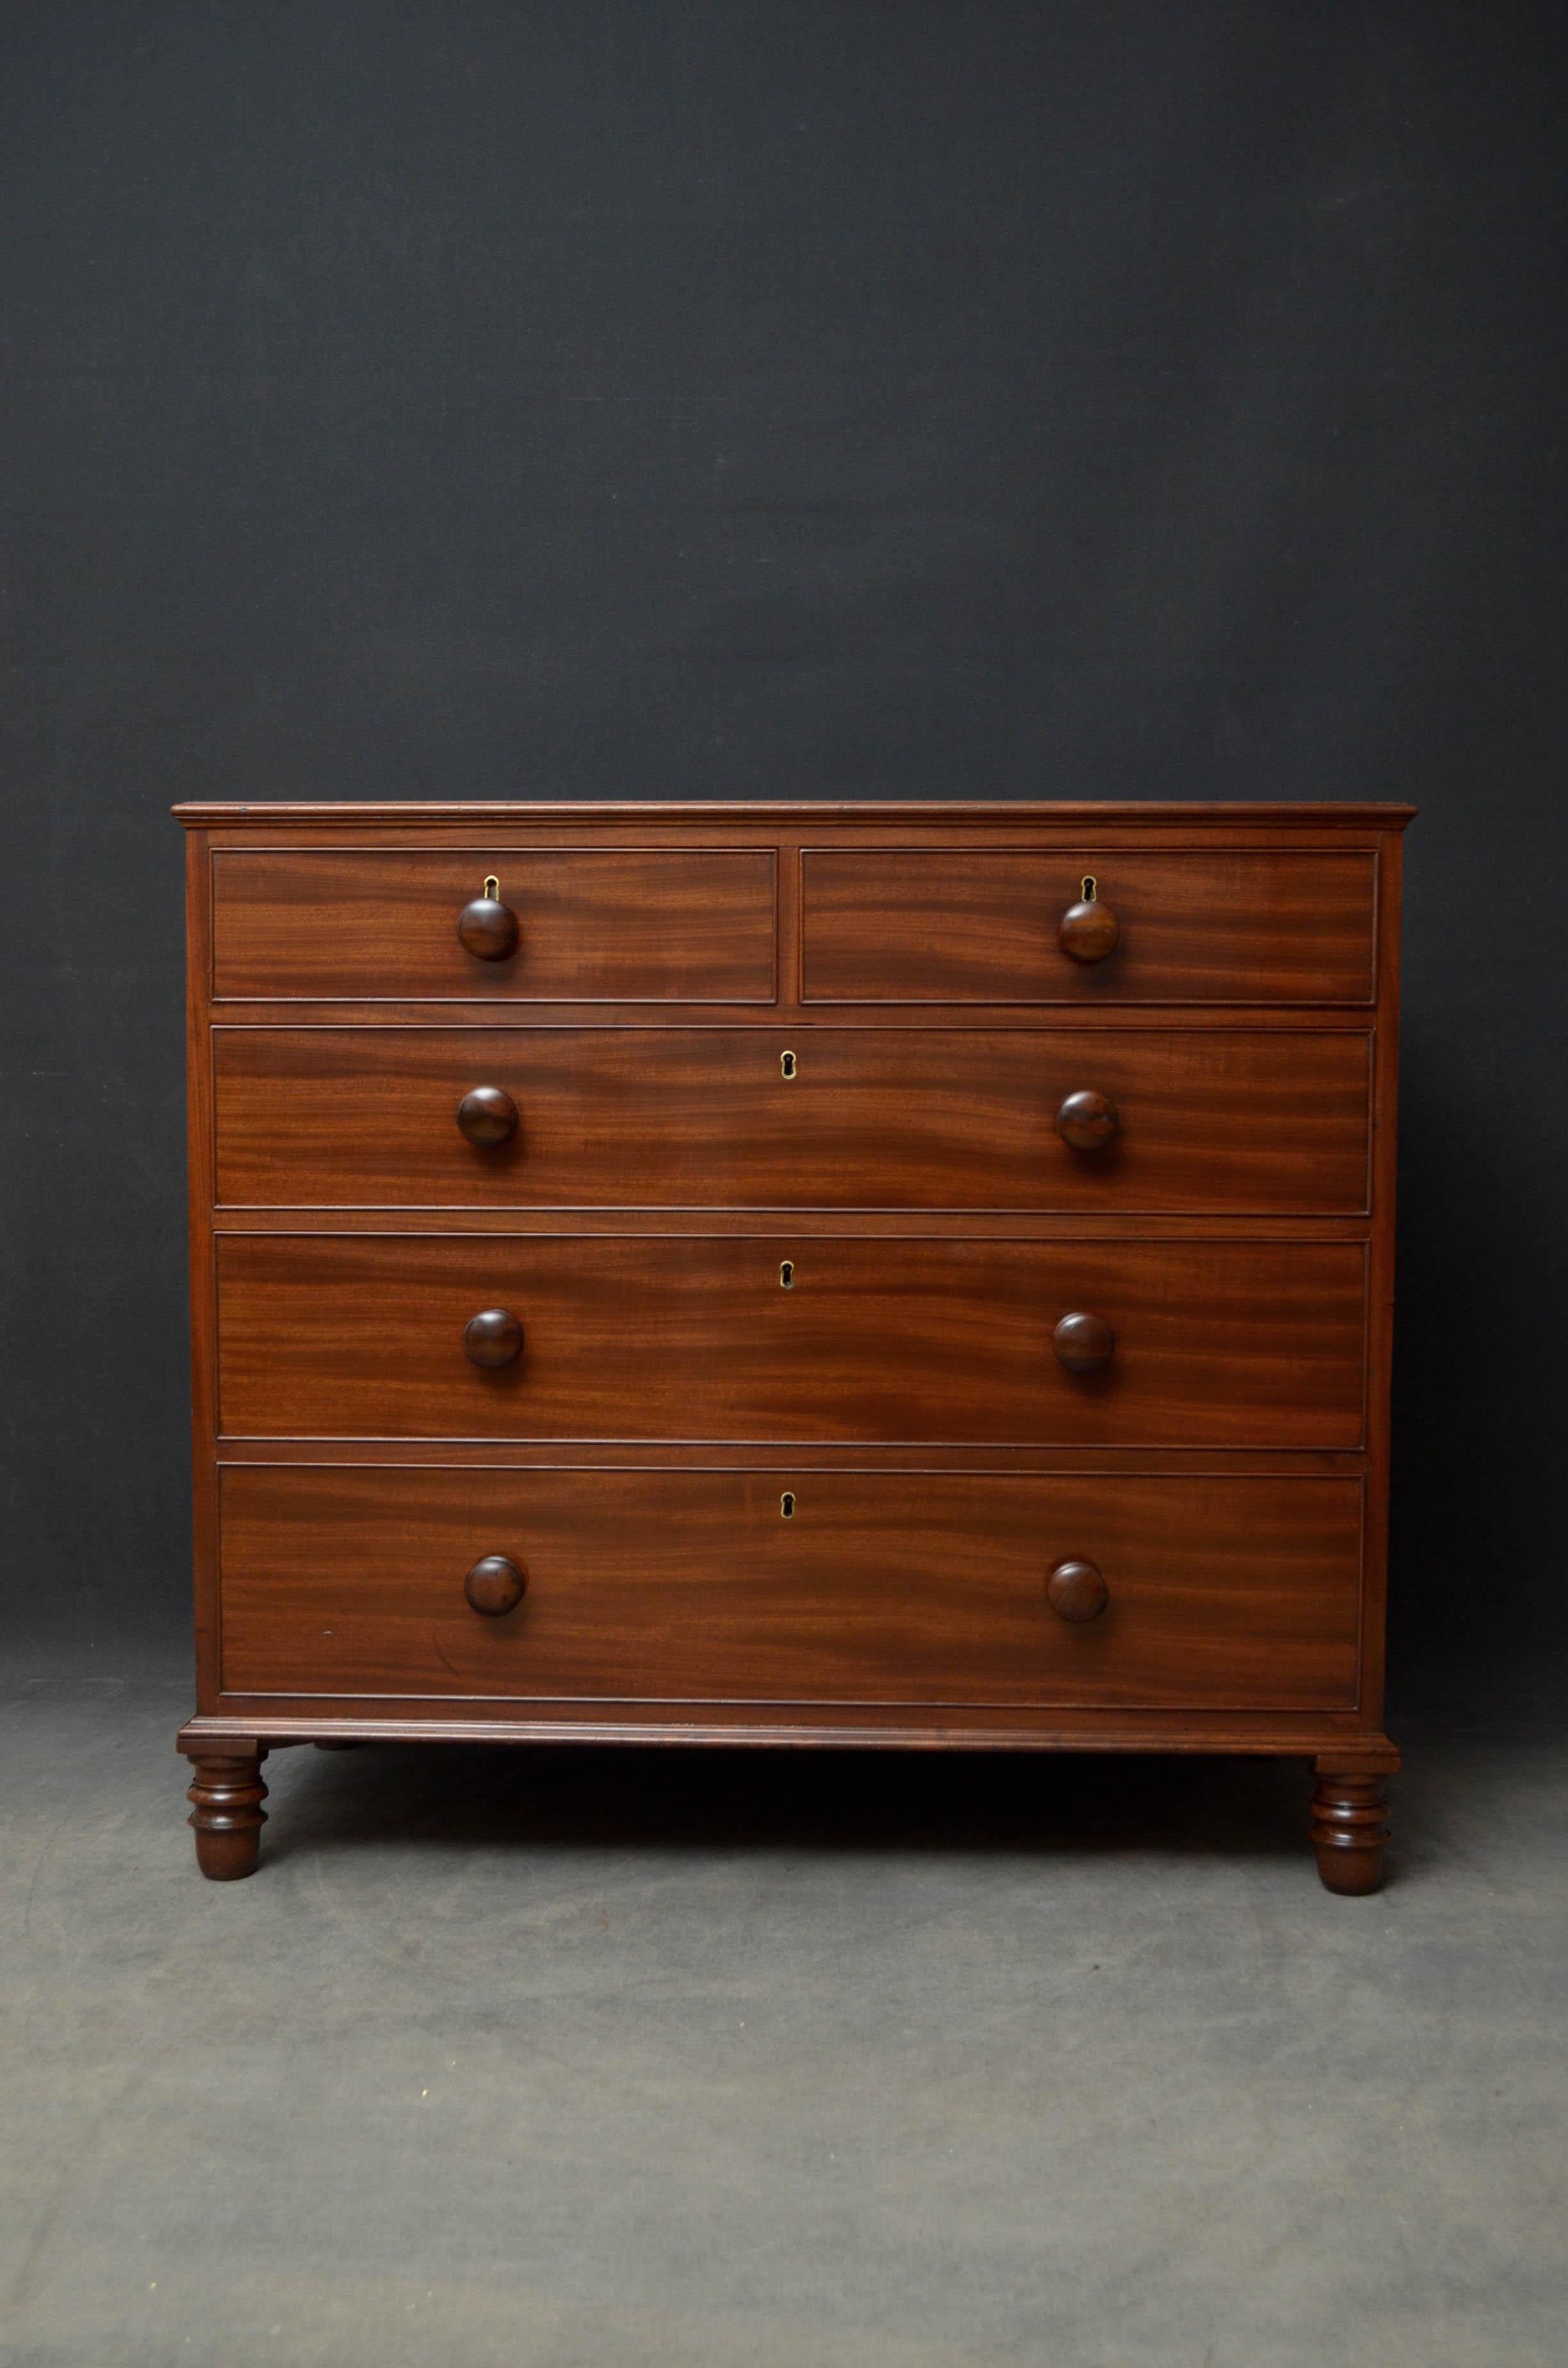 Sn4728, superb quality George IV mahogany chest of drawers, having figured mahogany top above 2 short over 3 long graduated and cockbeaded drawers, all fitted with original turned knobs, standing on turned feet. This antique chest of drawers has